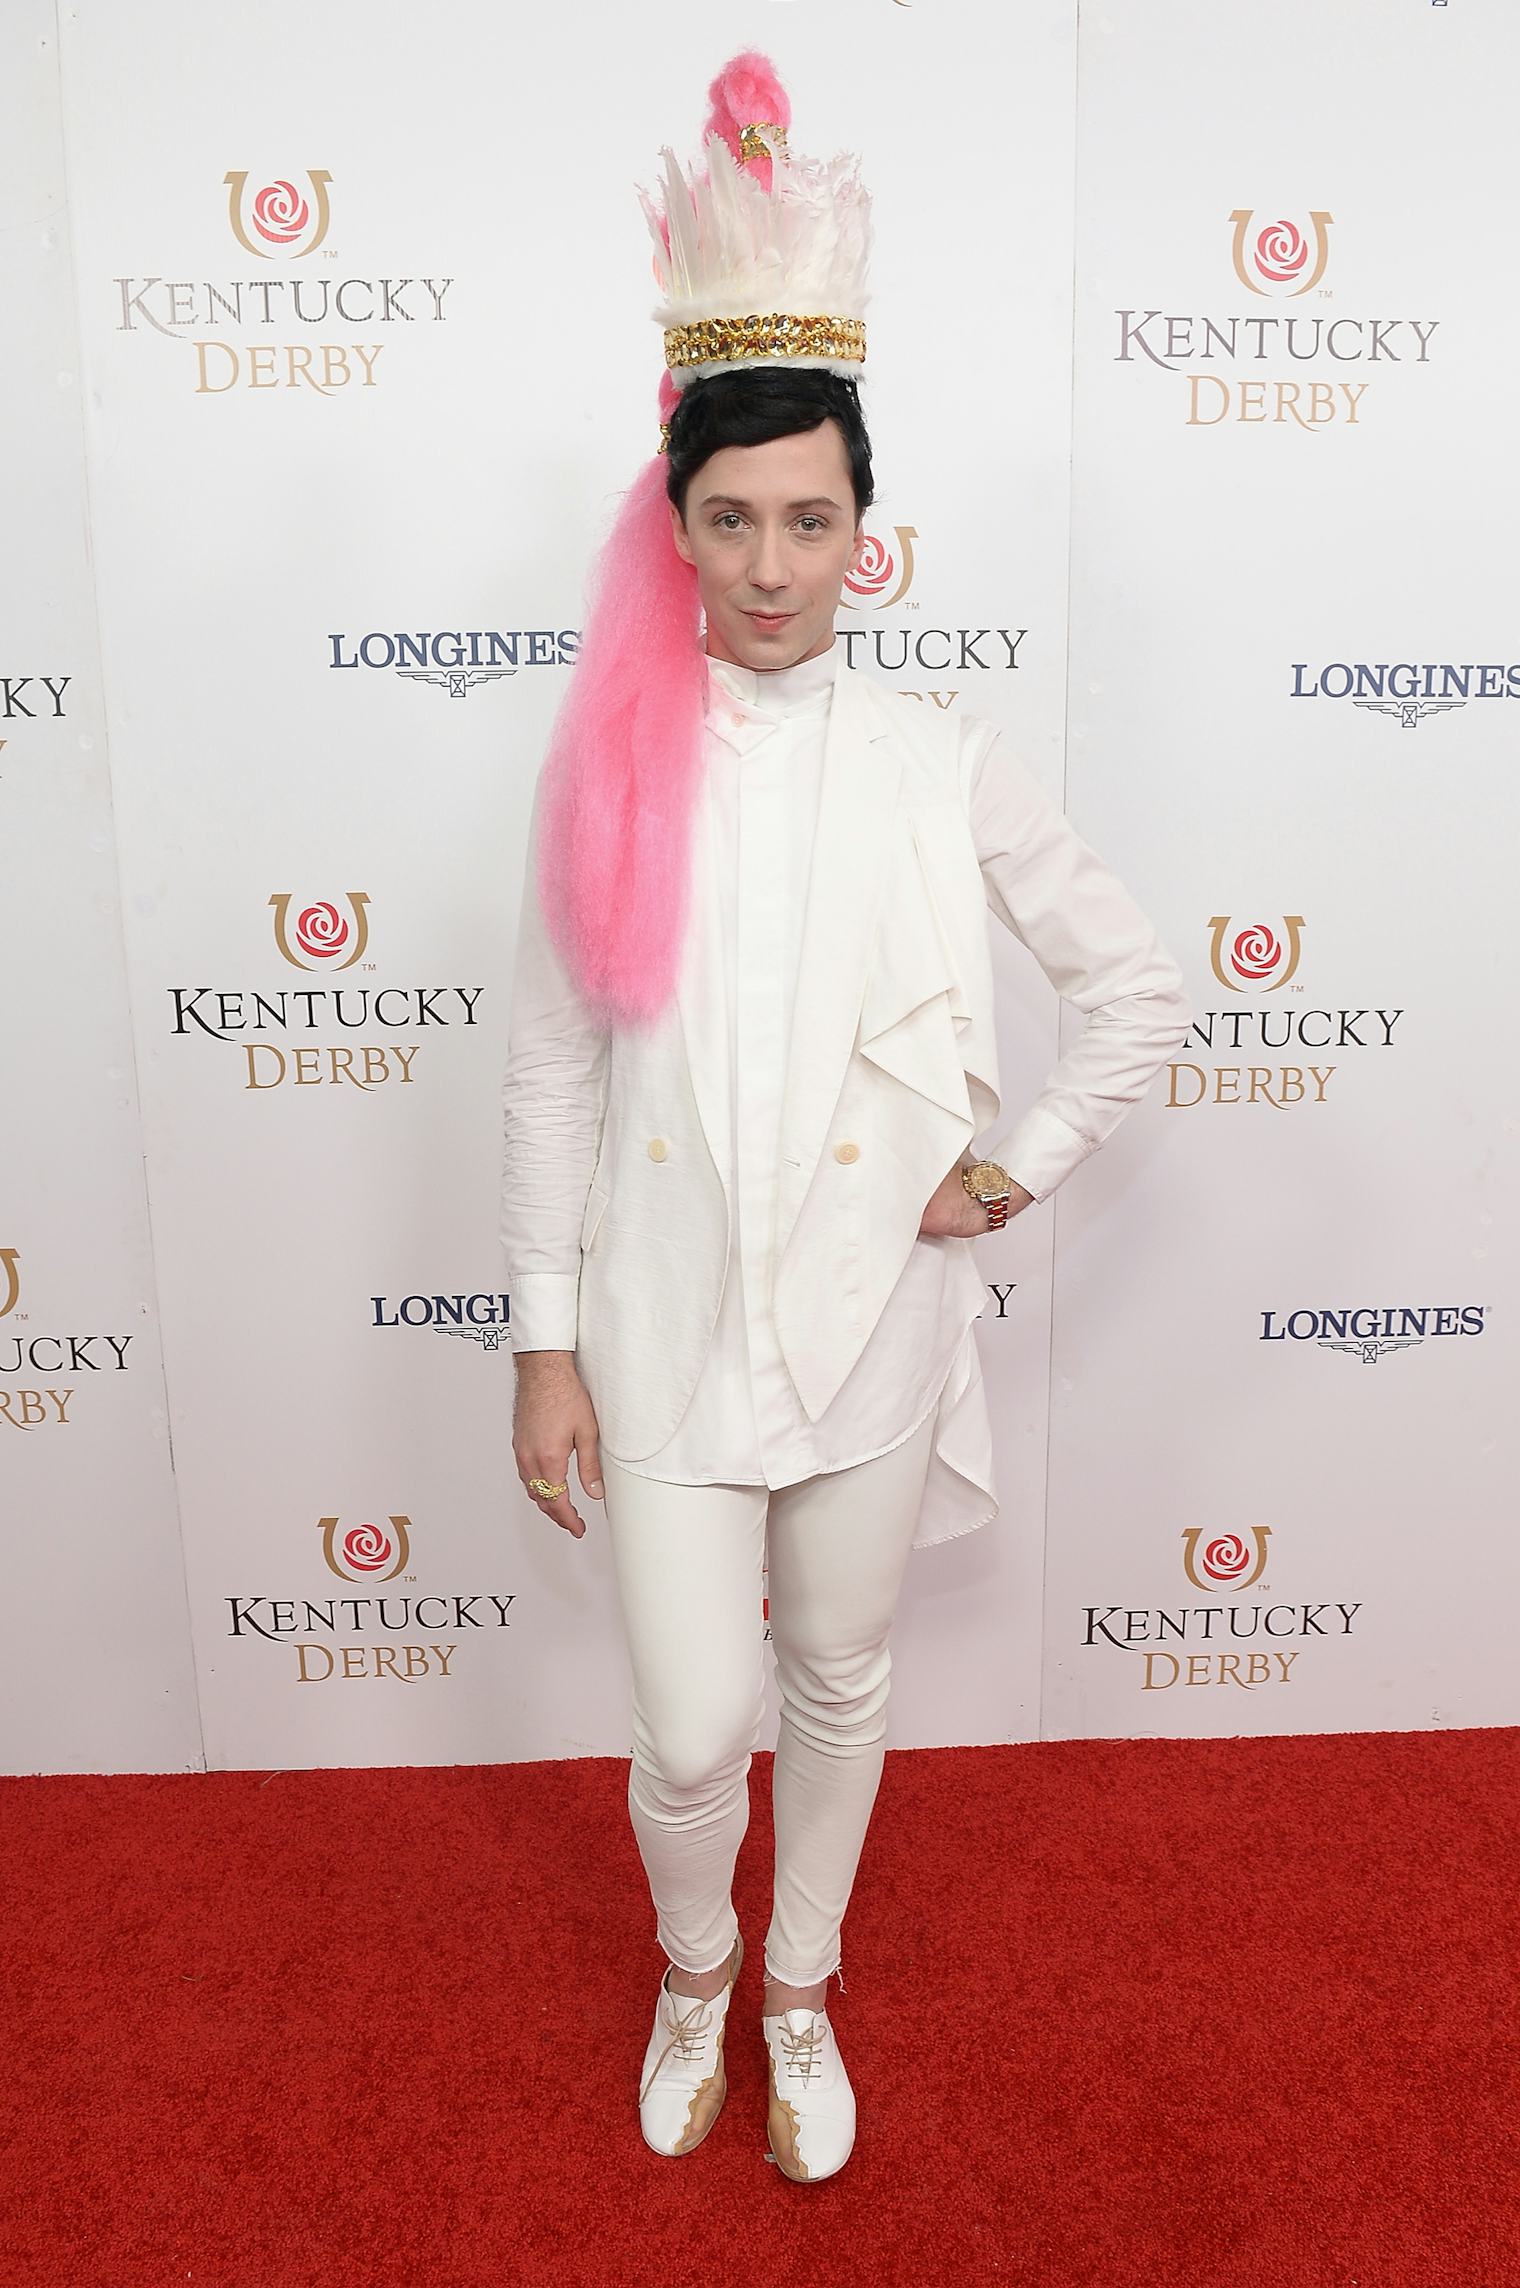 Twitter Reactions To Johnny Weir's 2016 Kentucky Derby Hat Prove His